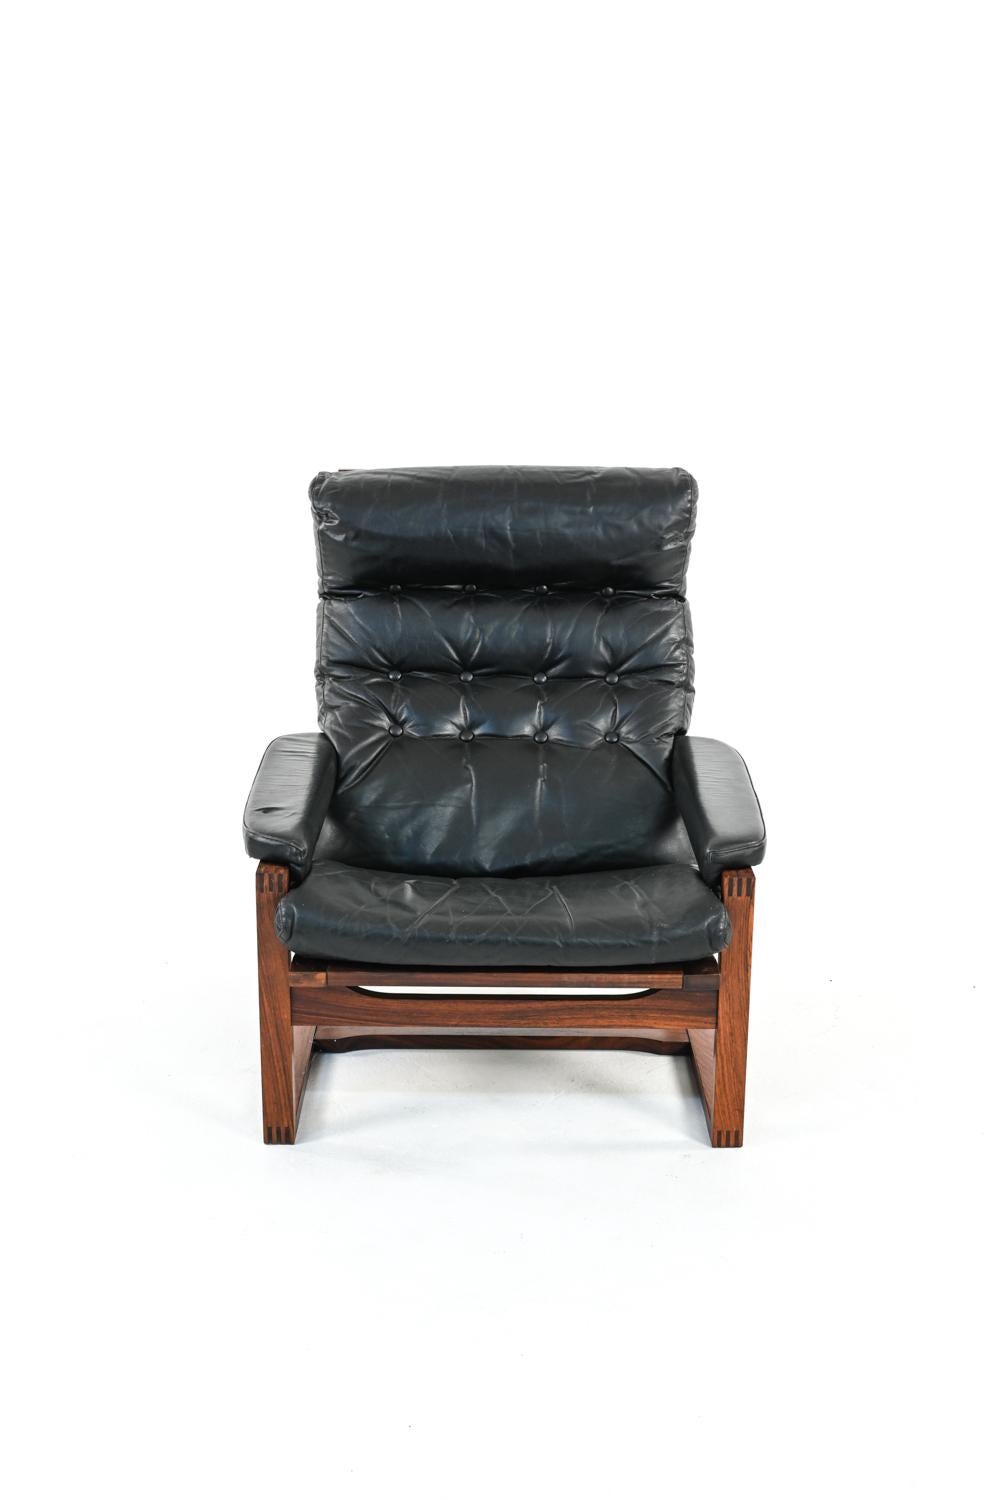 Scandinavian Modern Danish Rosewood & Leather Lounge Chair in the Manner of Percival Lafer, c. 1980 For Sale